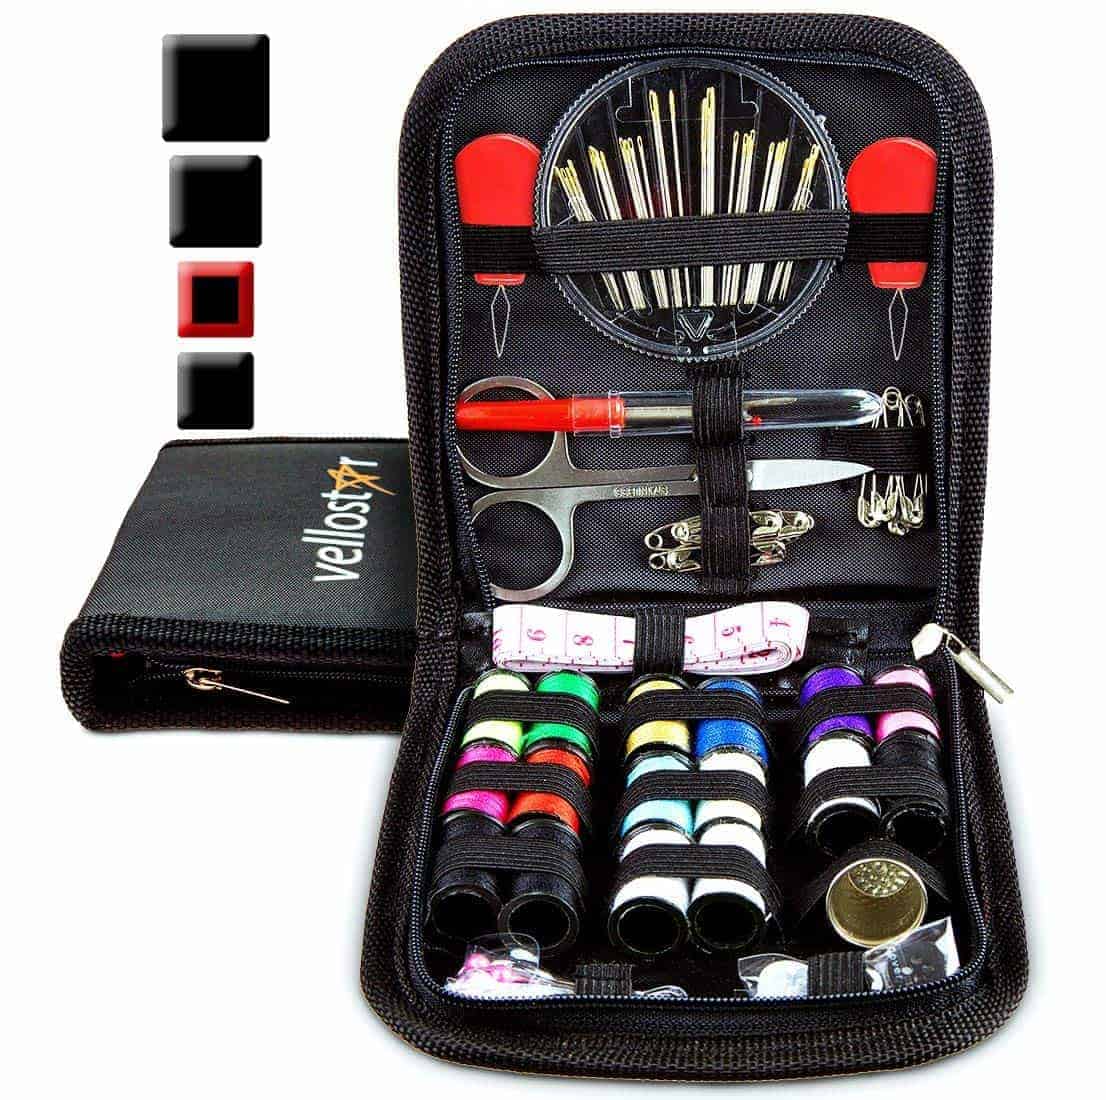 Sewing Kit for Any Emergency Clothing Repairs gift idea under 20 dollars